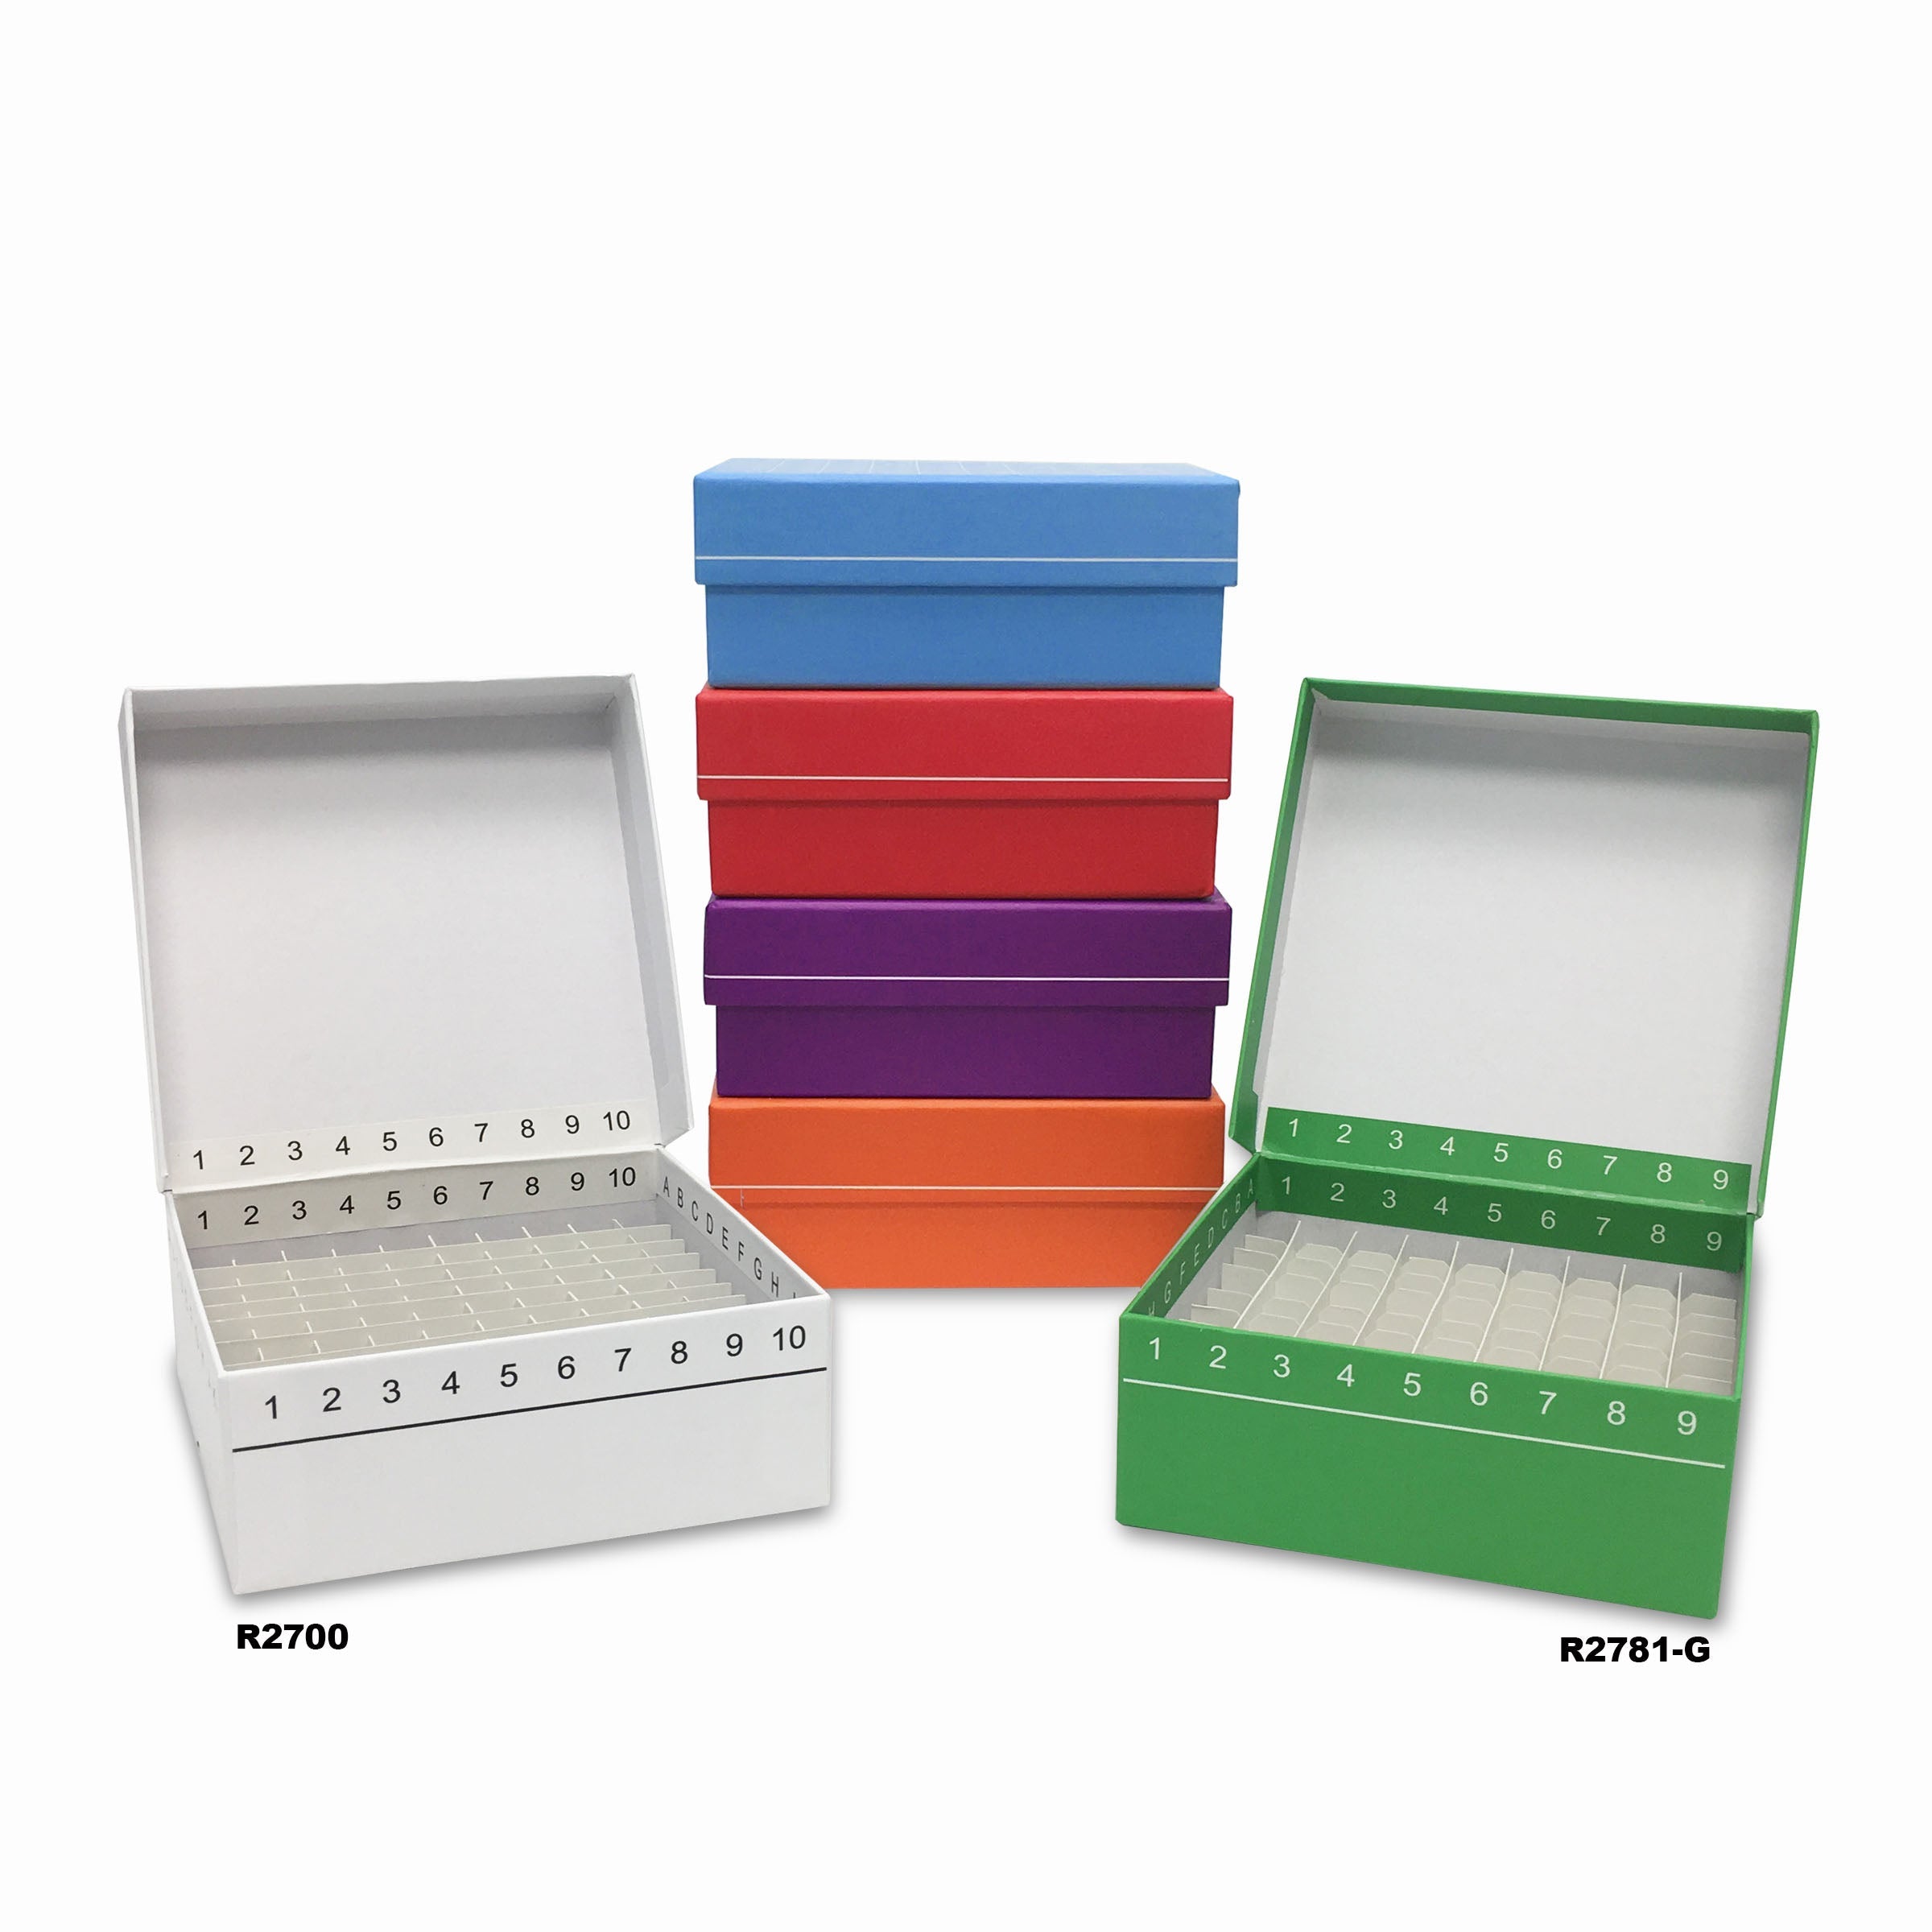 MTC Bio R2700-A, Fliptop Carboard Freezer Box with Attached Hinged Lid, 100-Place, Assorted Colors, 5/pk